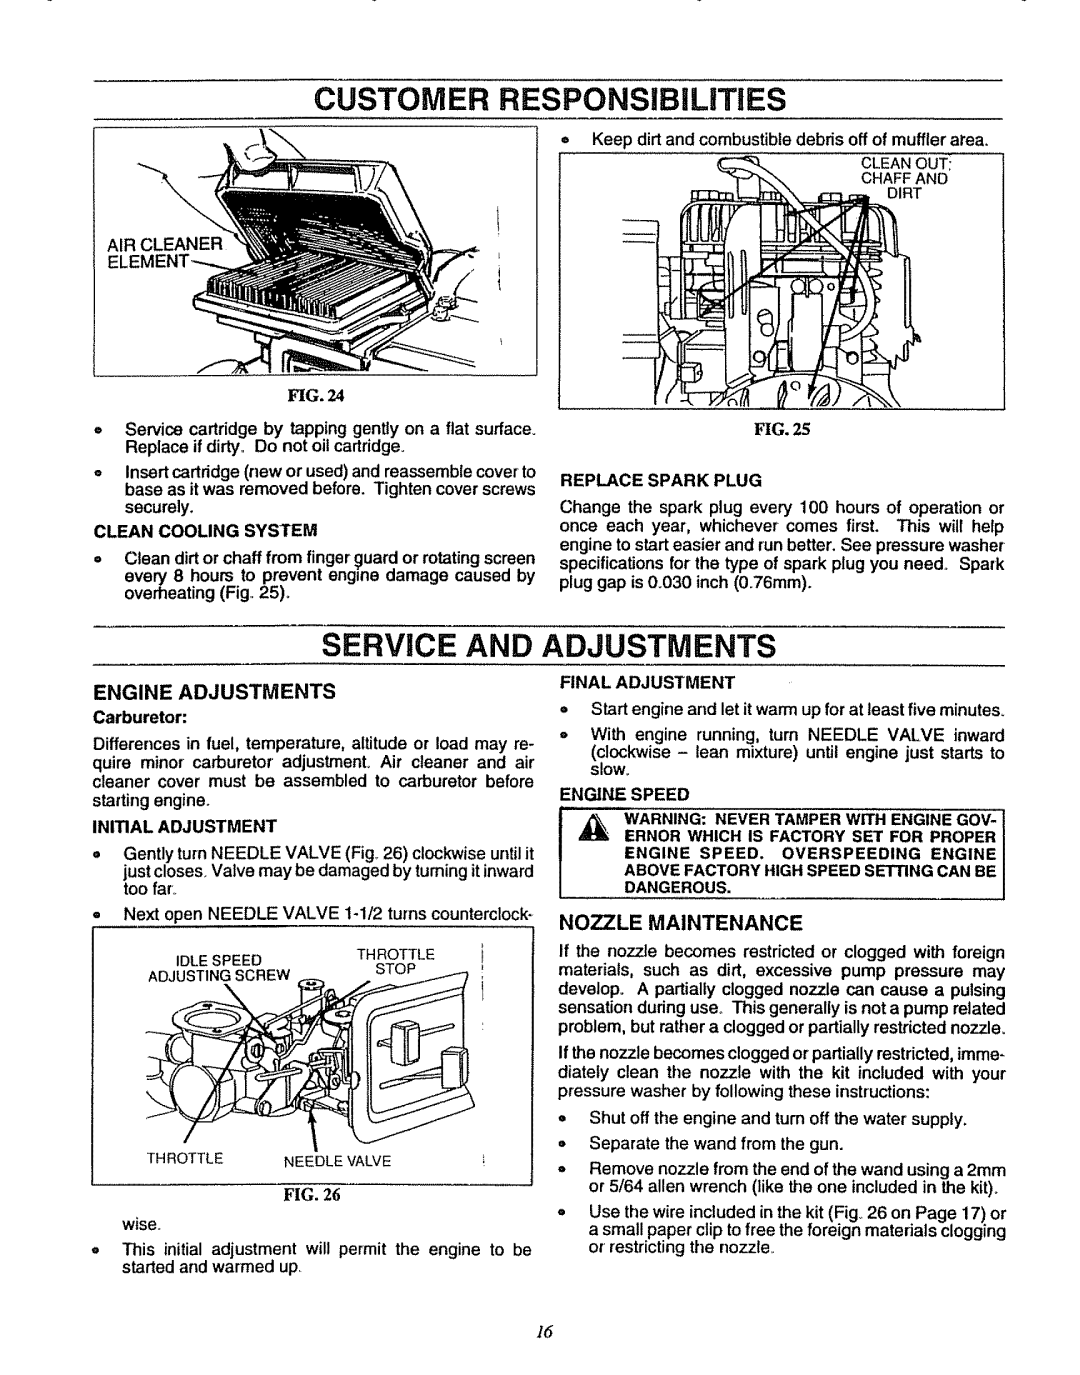 Sears 580.7515 manual CUSTOMER RESPONSIBiLiTiES, Service And Adjustments, Fig 